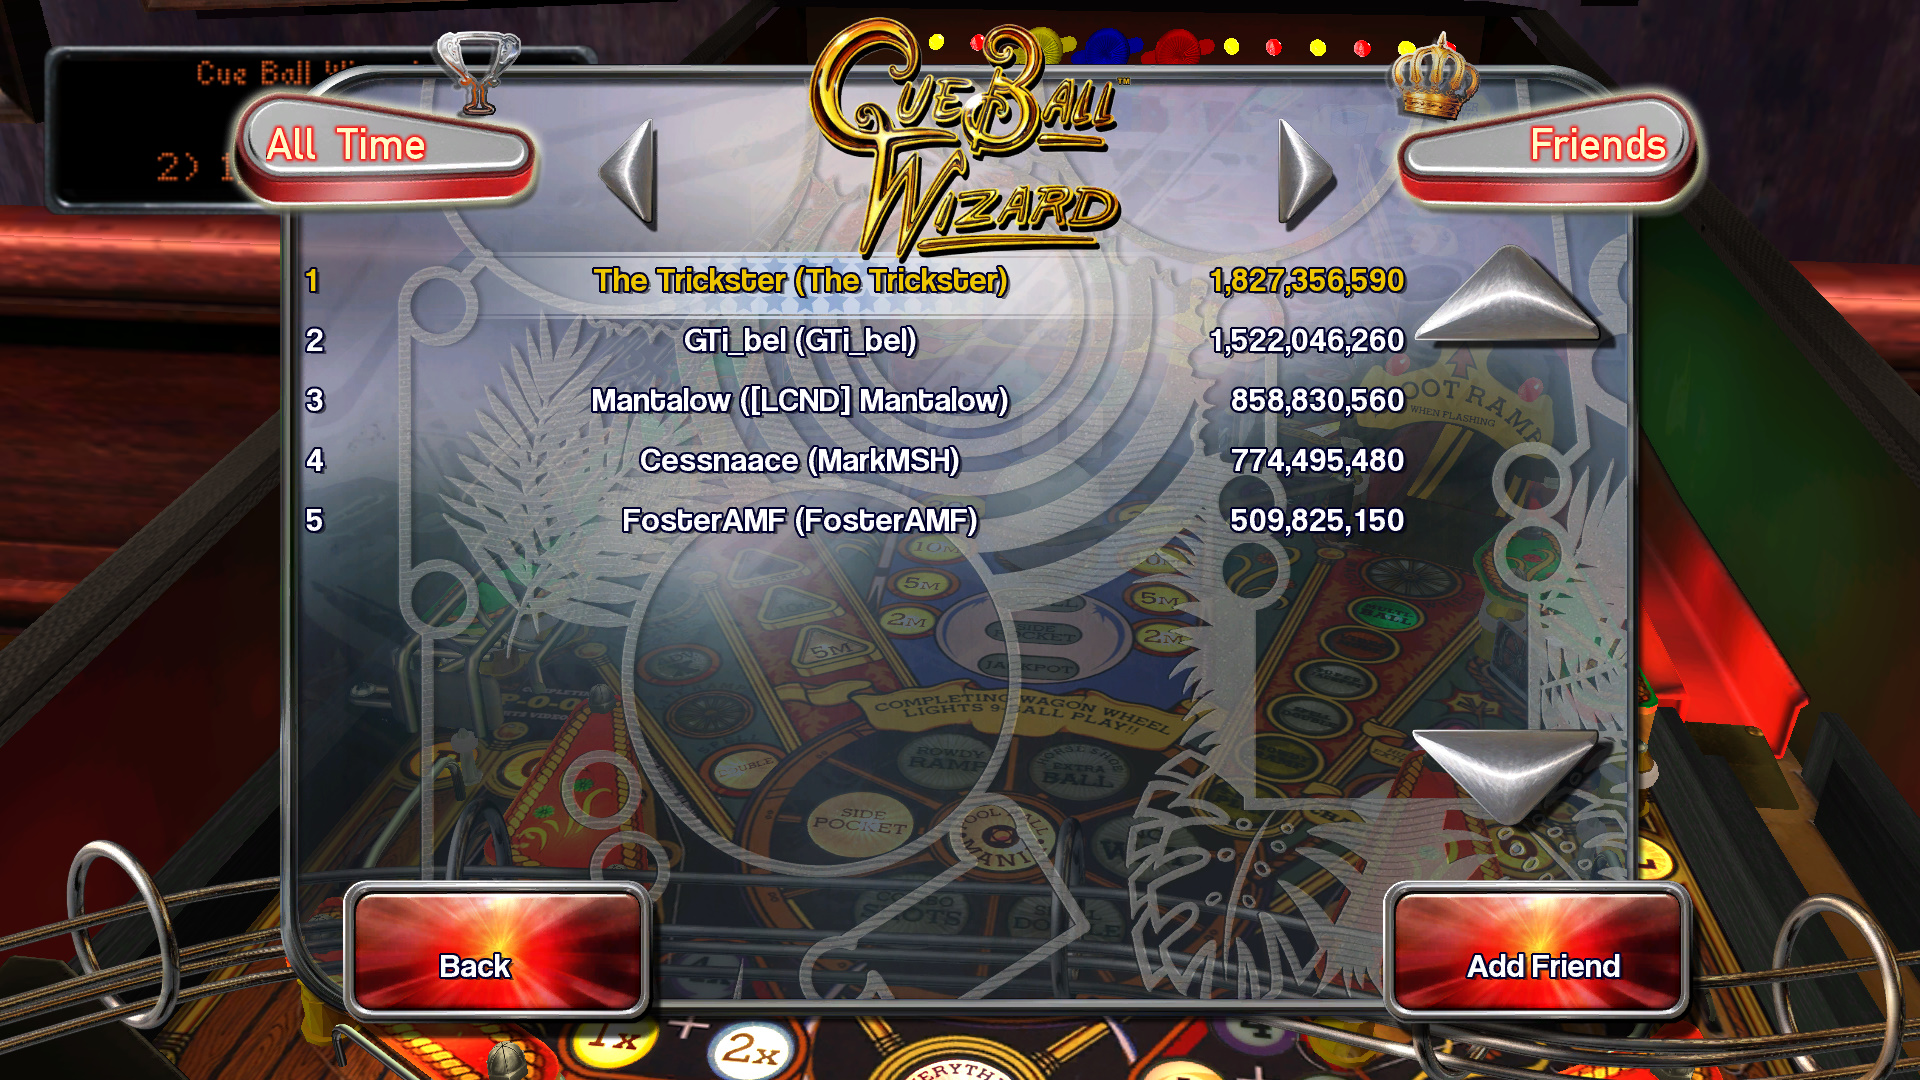 TheTrickster: Pinball Arcade: Cue Ball Wizard (PC) 1,827,356,590 points on 2015-11-13 17:22:17